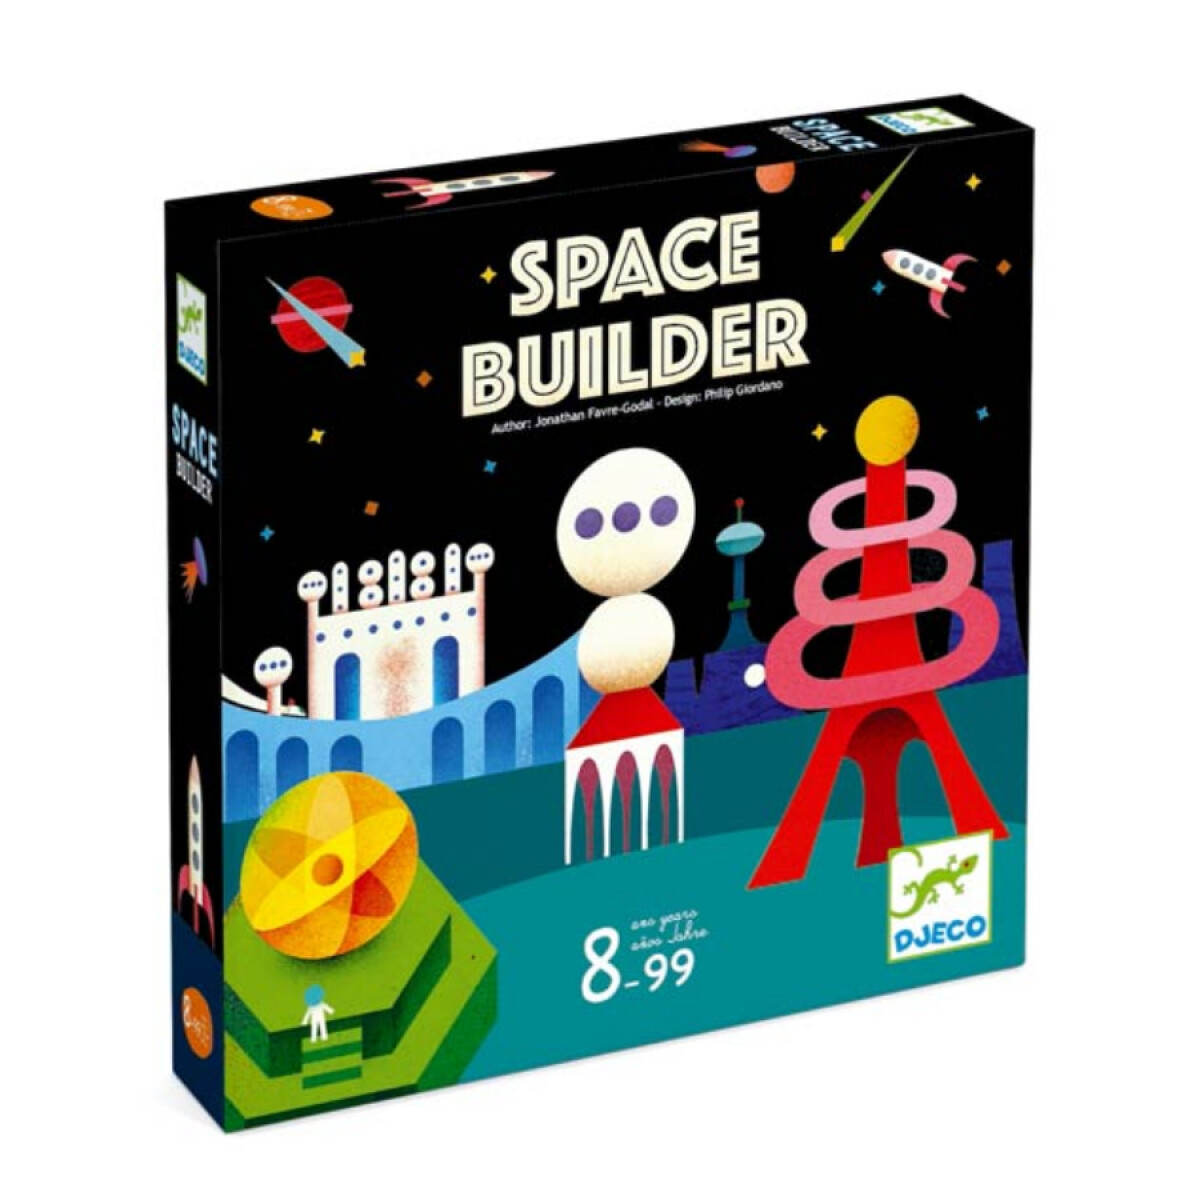 Space Builder by Djeco 